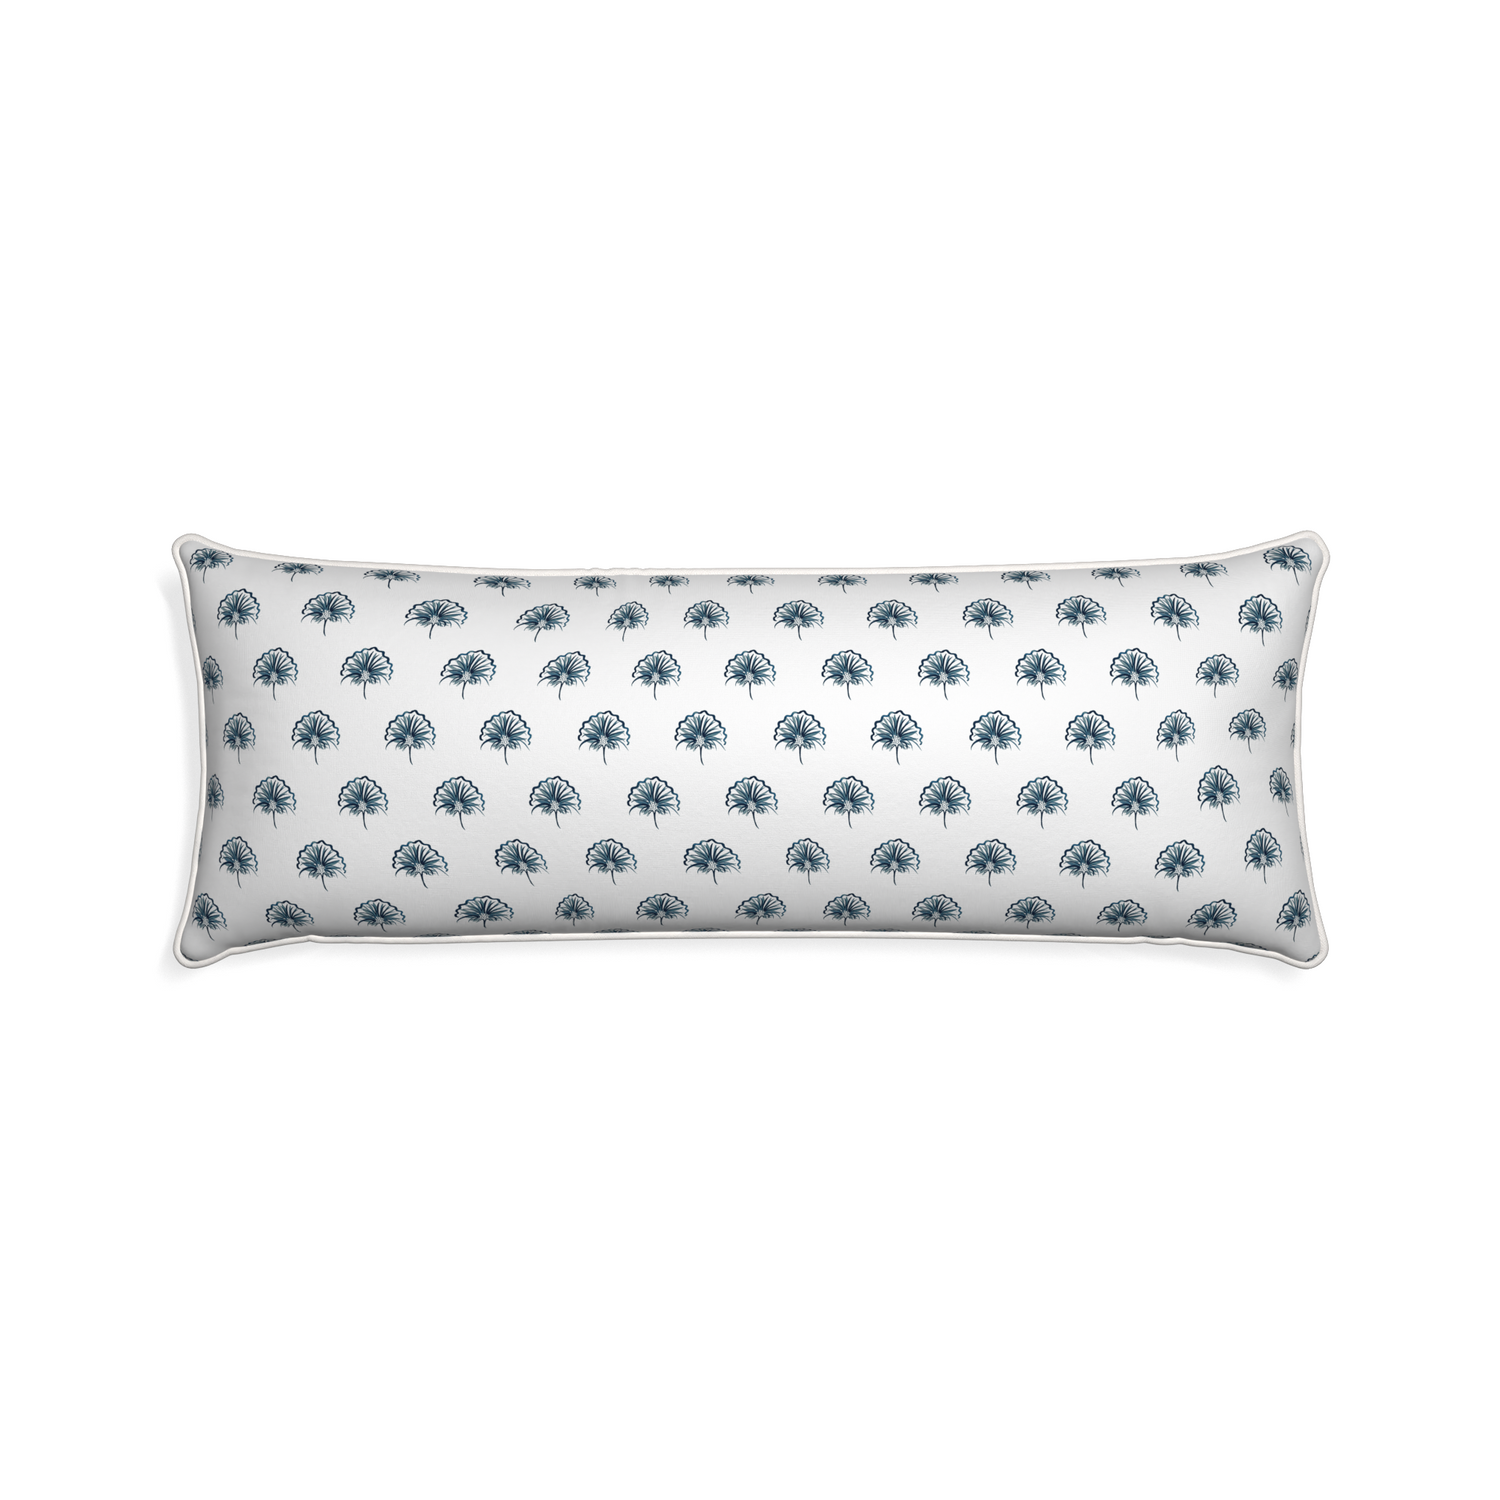 Xl-lumbar penelope midnight custom floral navypillow with snow piping on white background